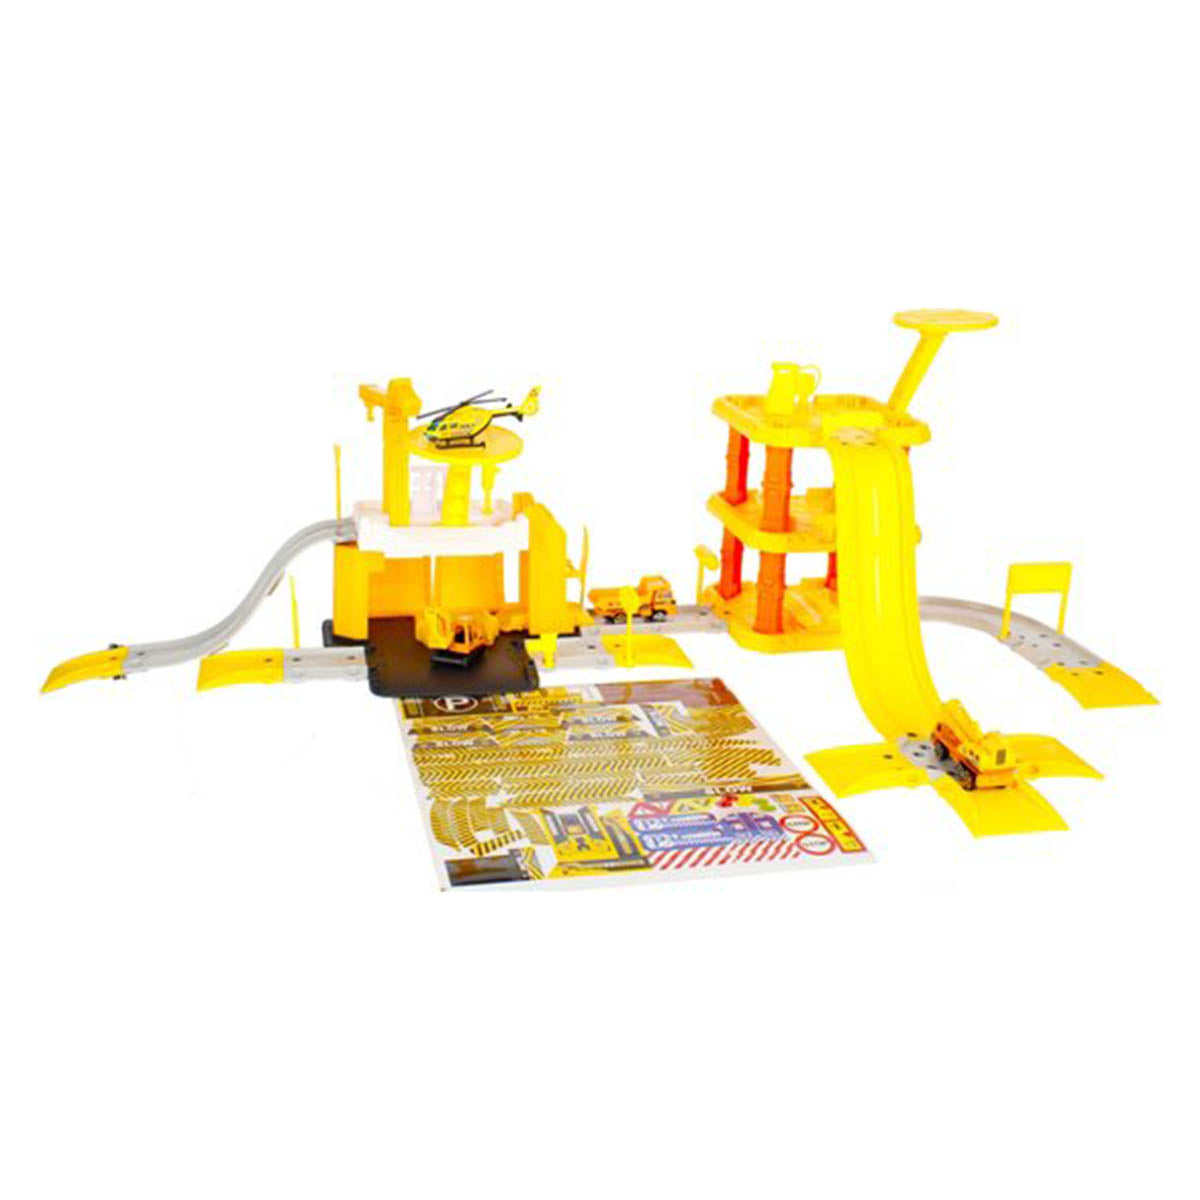 <tc>Ariko</tc> Parking garage Construction vehicle - Construction site - With excavator, box truck, helicopter, crane and gas station - 1:64 -